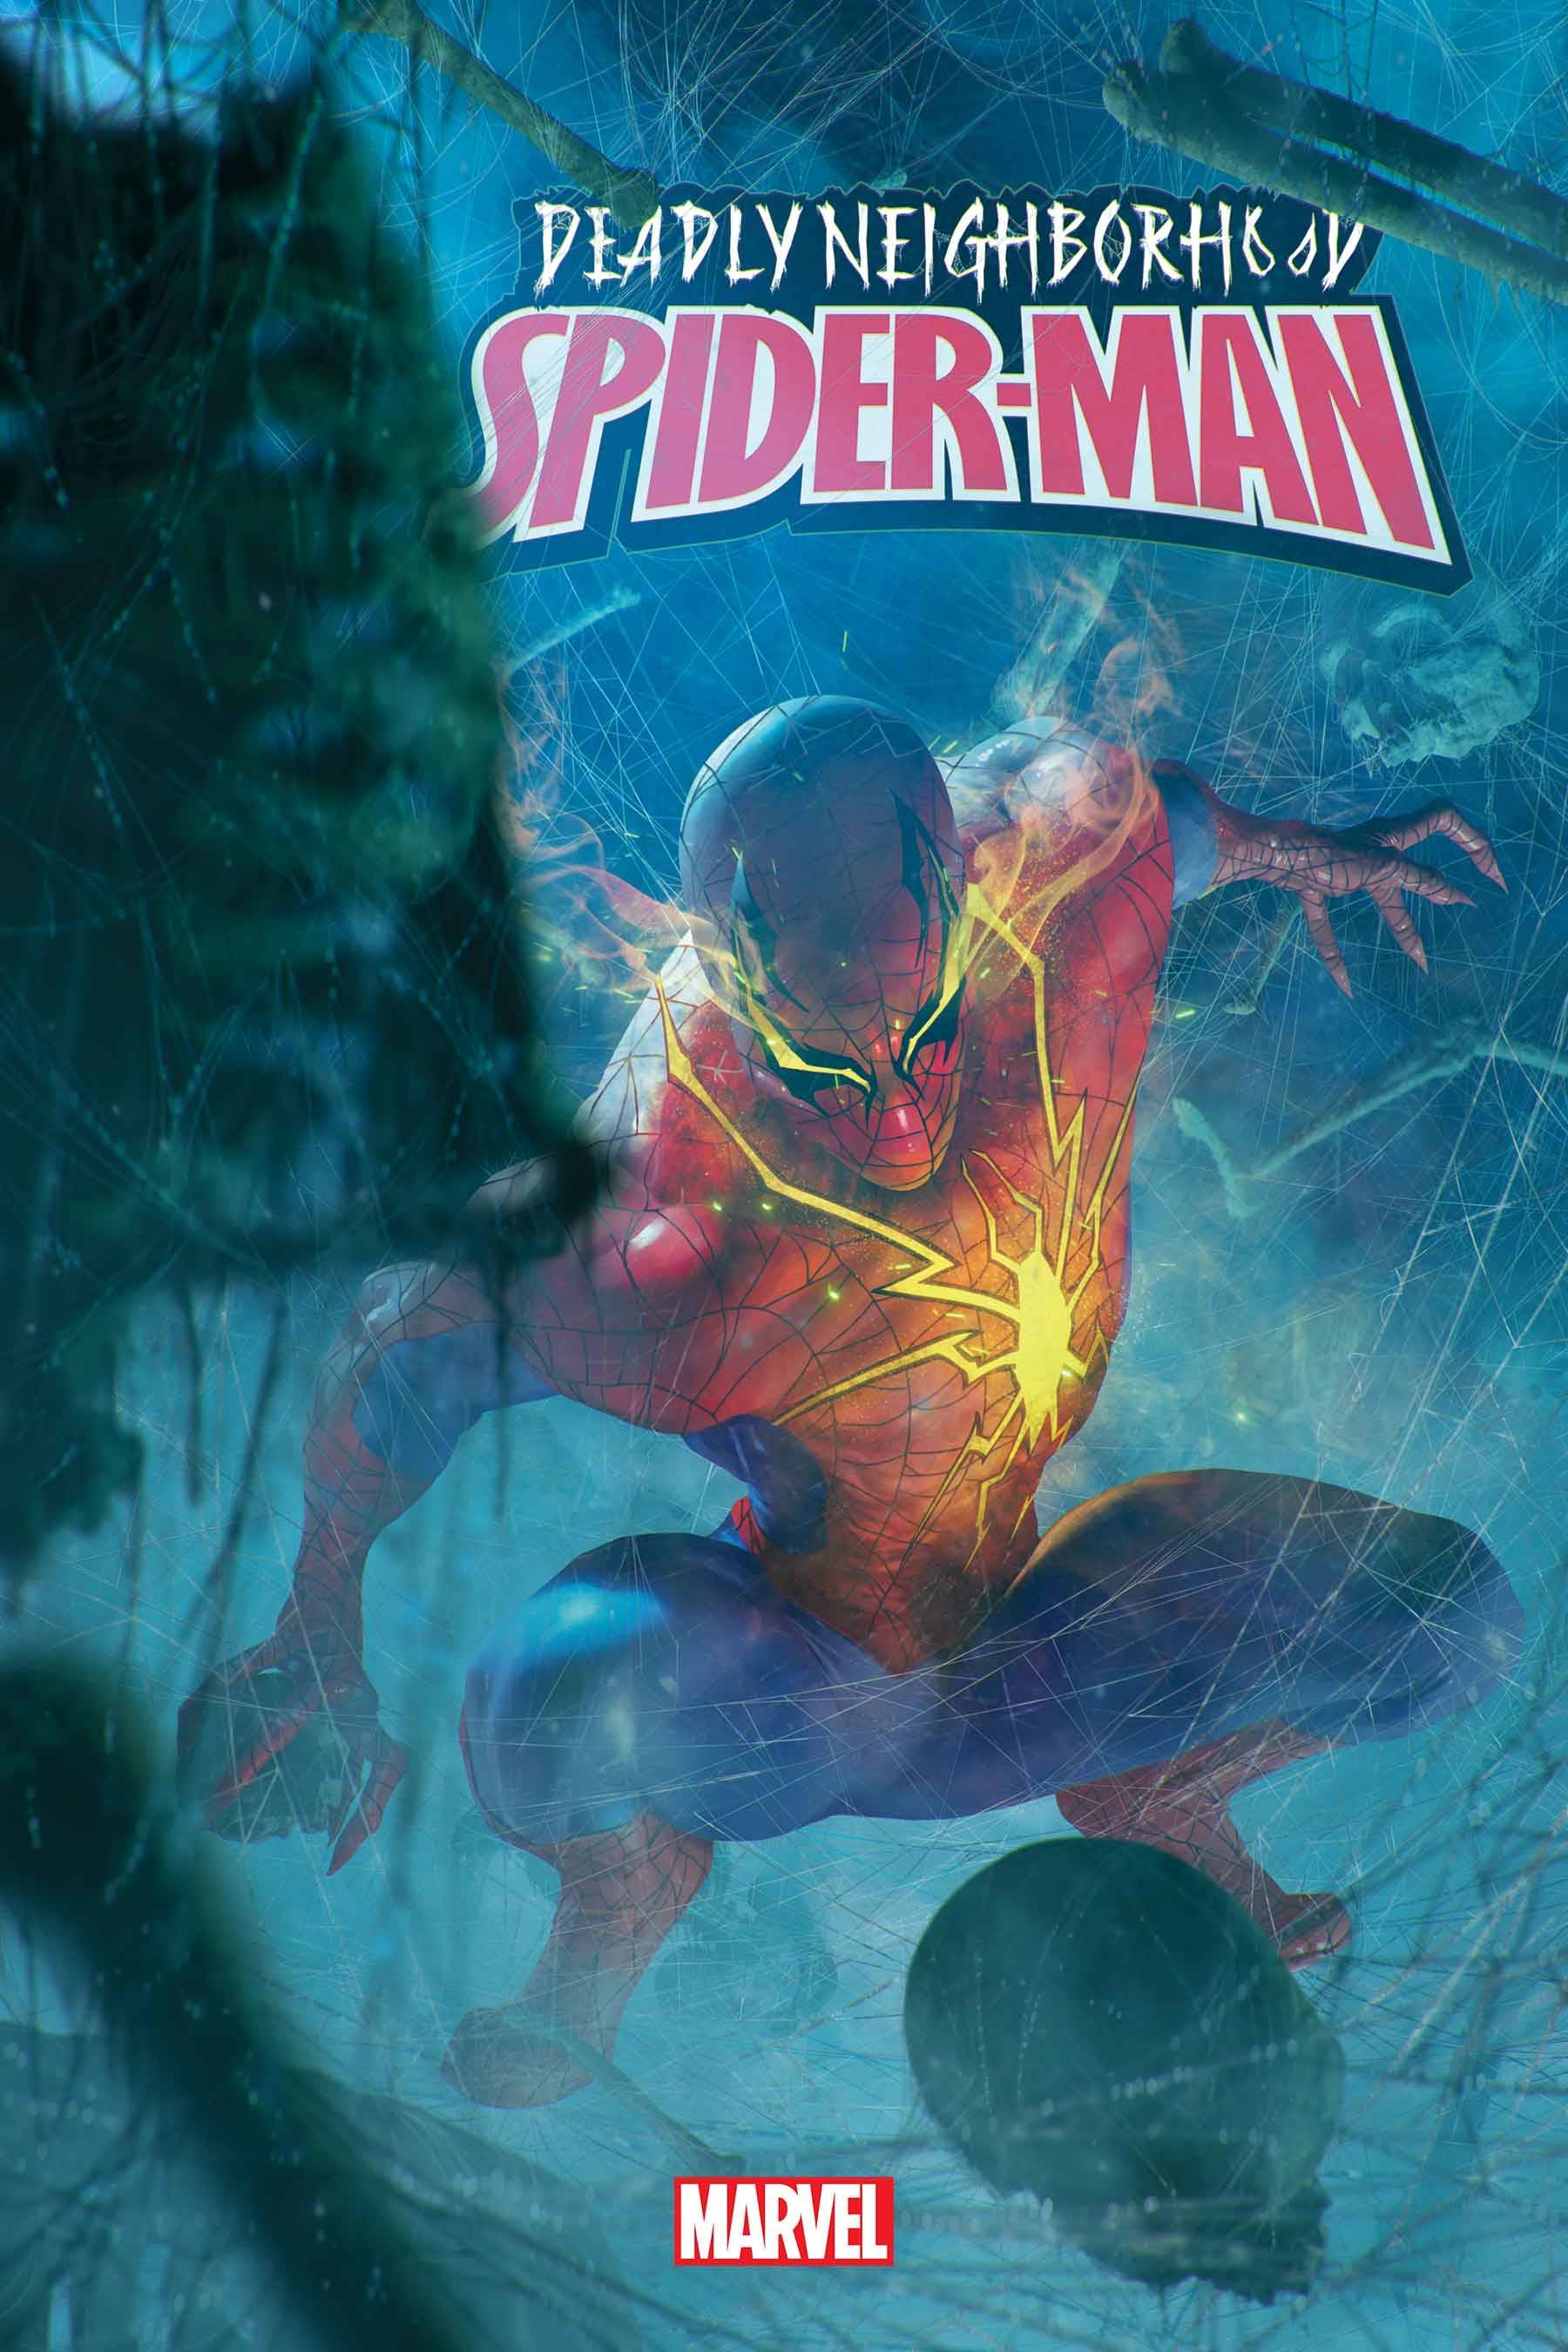 DEADLY NEIGHBORHOOD SPIDER-MAN #4 (OF 5) - King Gaming 